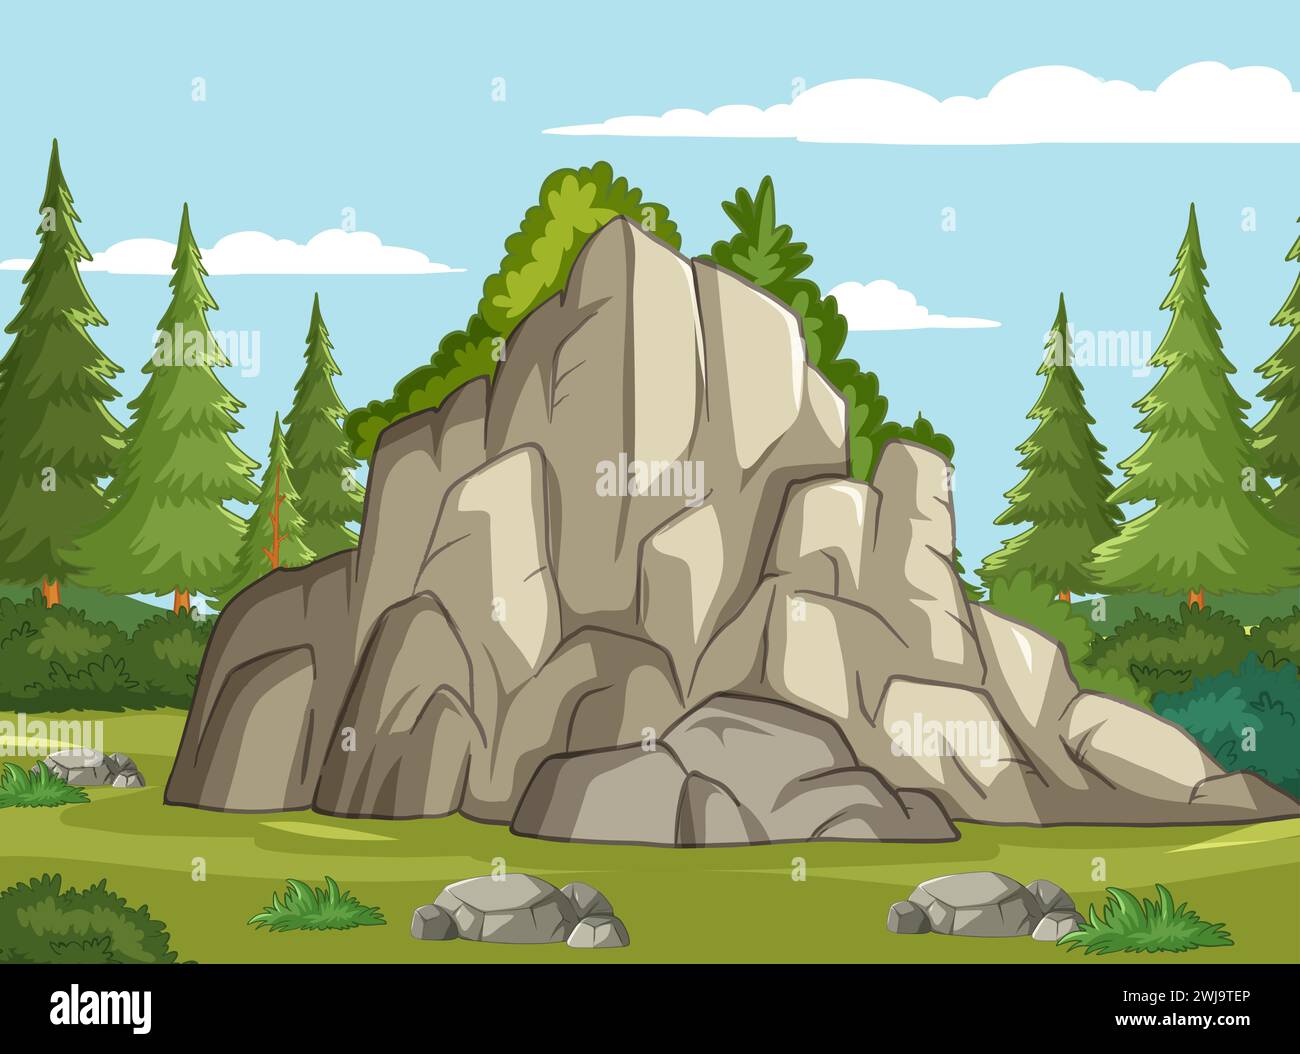 Vector illustration of a large rock formation in a forest Stock Vector